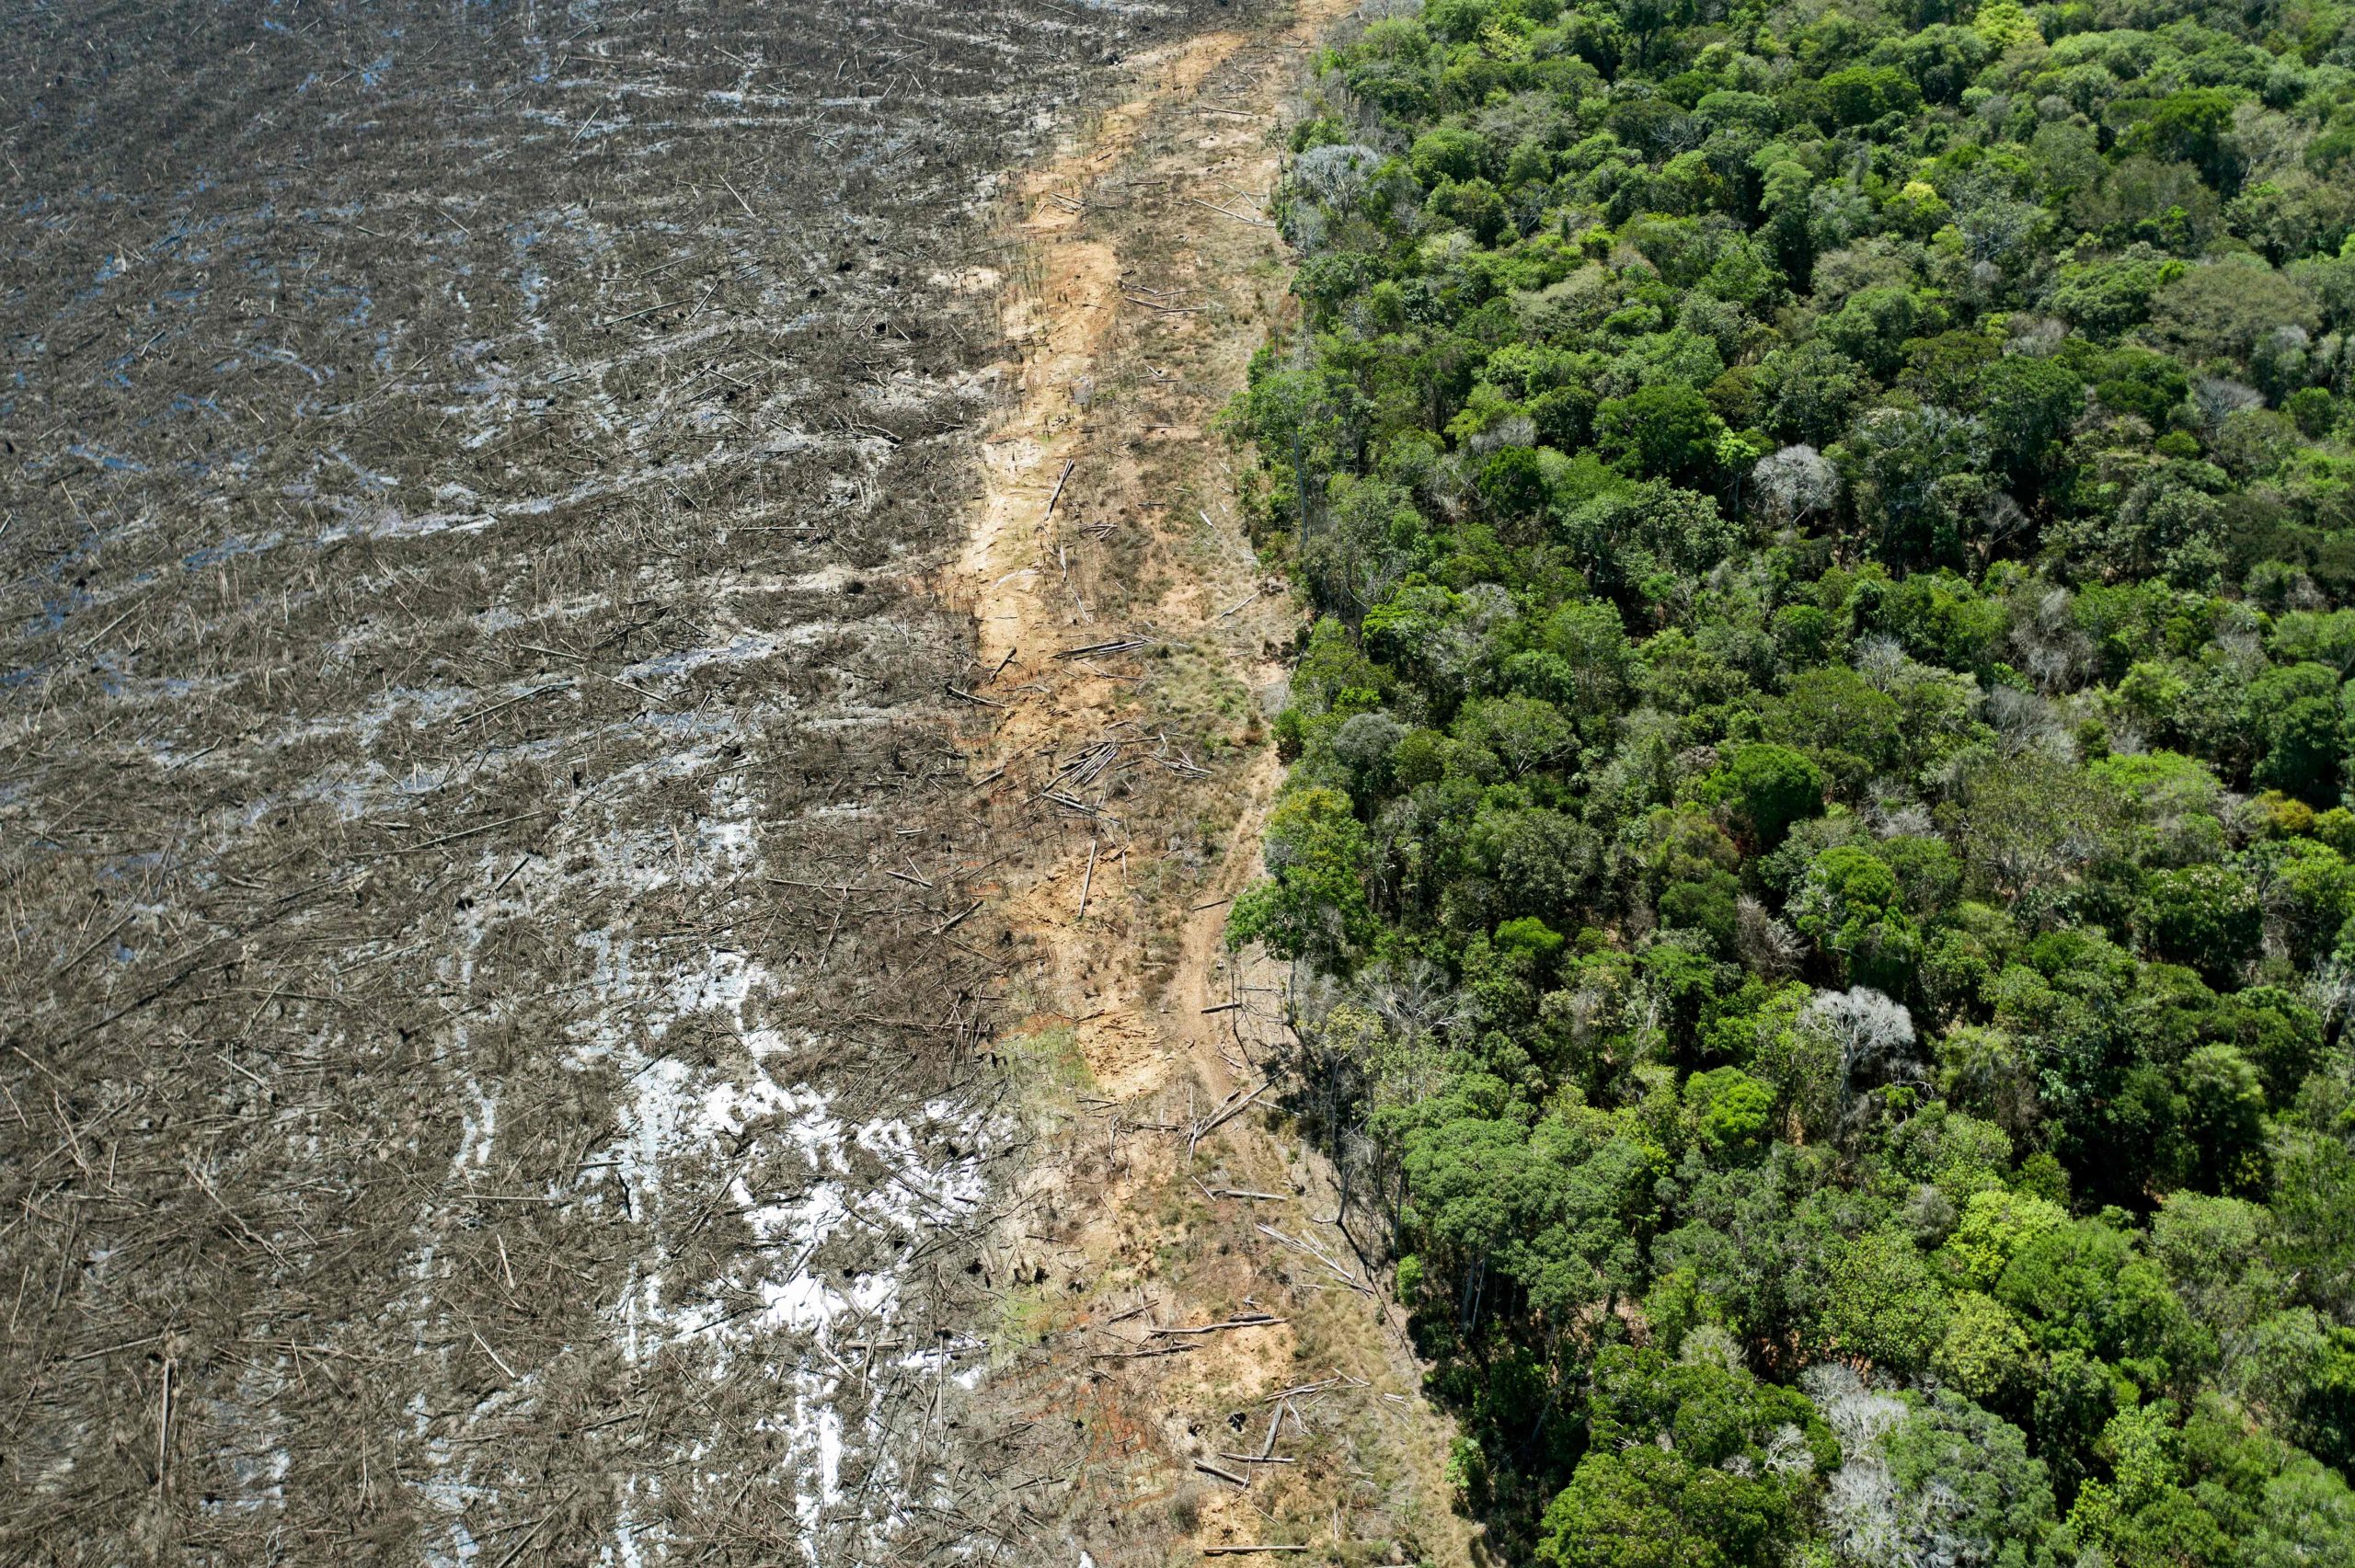 An aerial photo shows a deforested area in Brazil on Aug. 7, 2020. (Florian Plaucheu/AFP via Getty Images)